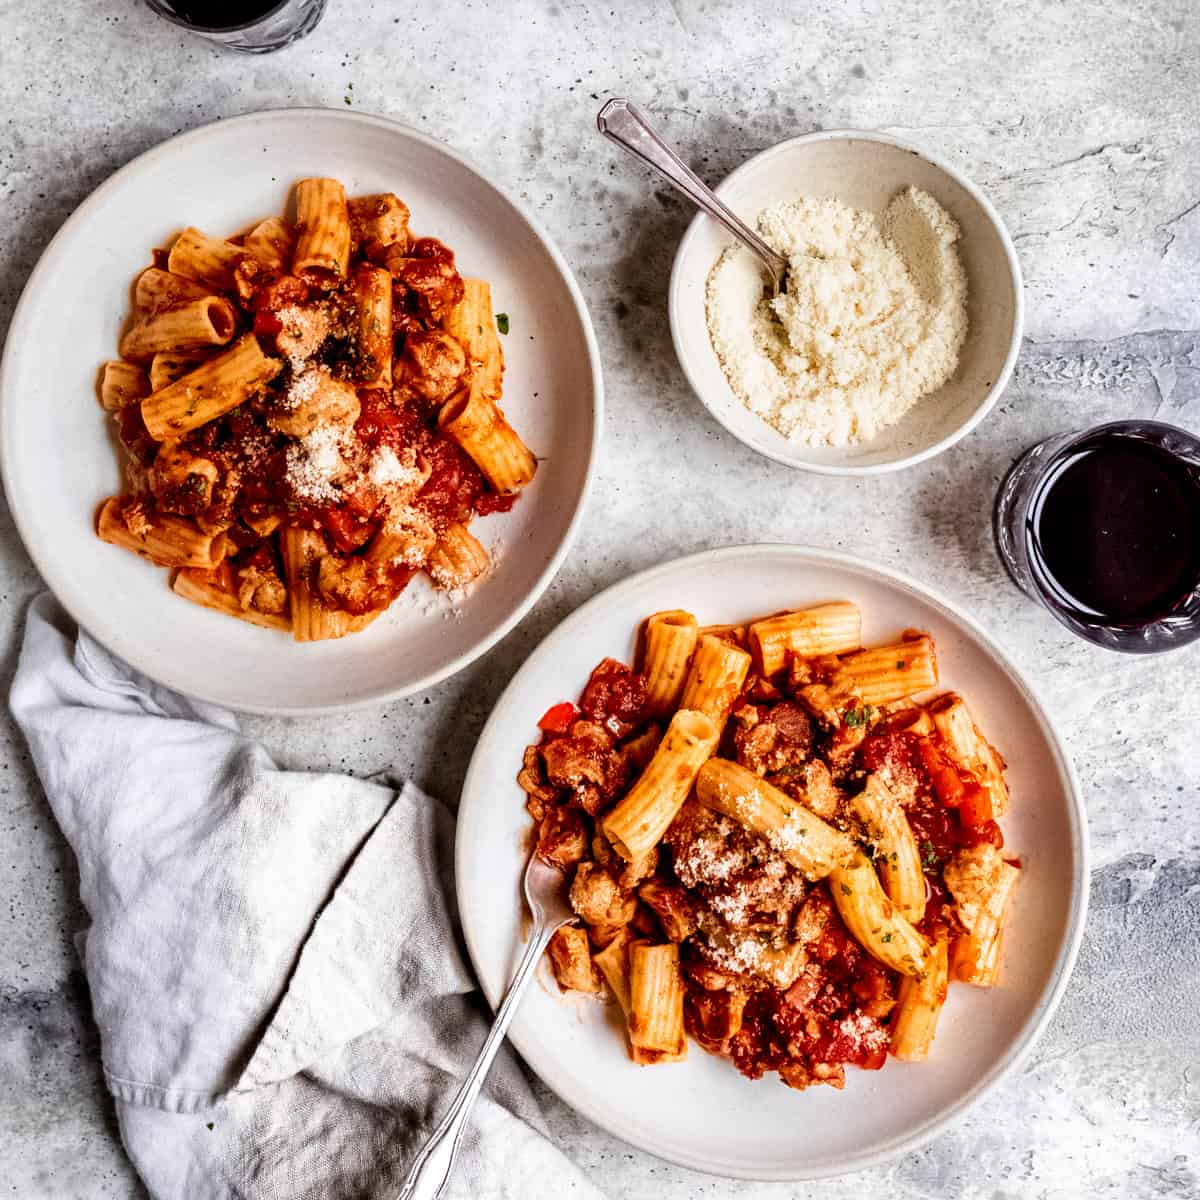 Sausage and pepper pasta in a white bowl